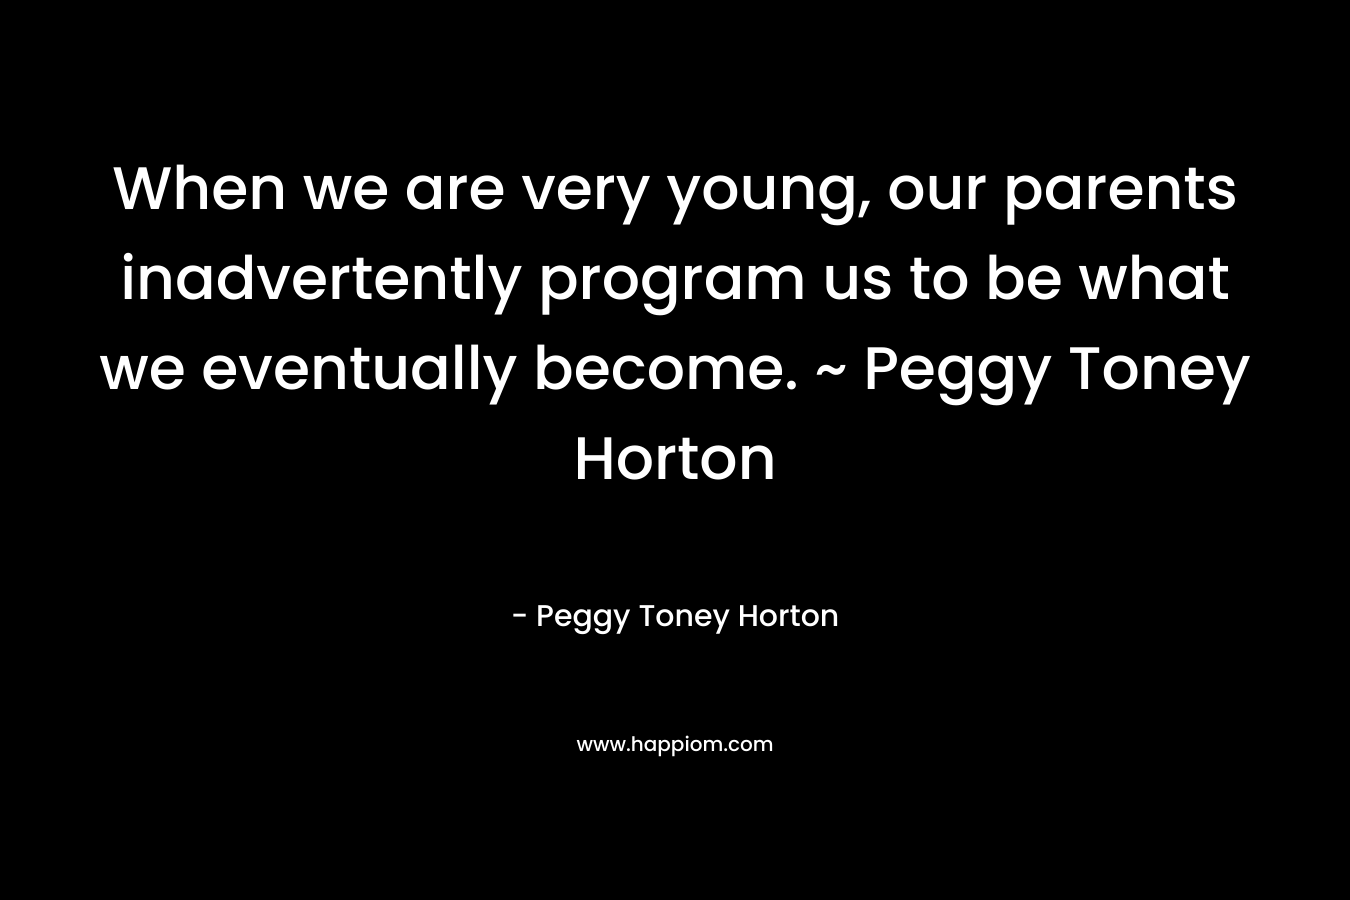 When we are very young, our parents inadvertently program us to be what we eventually become. ~ Peggy Toney Horton